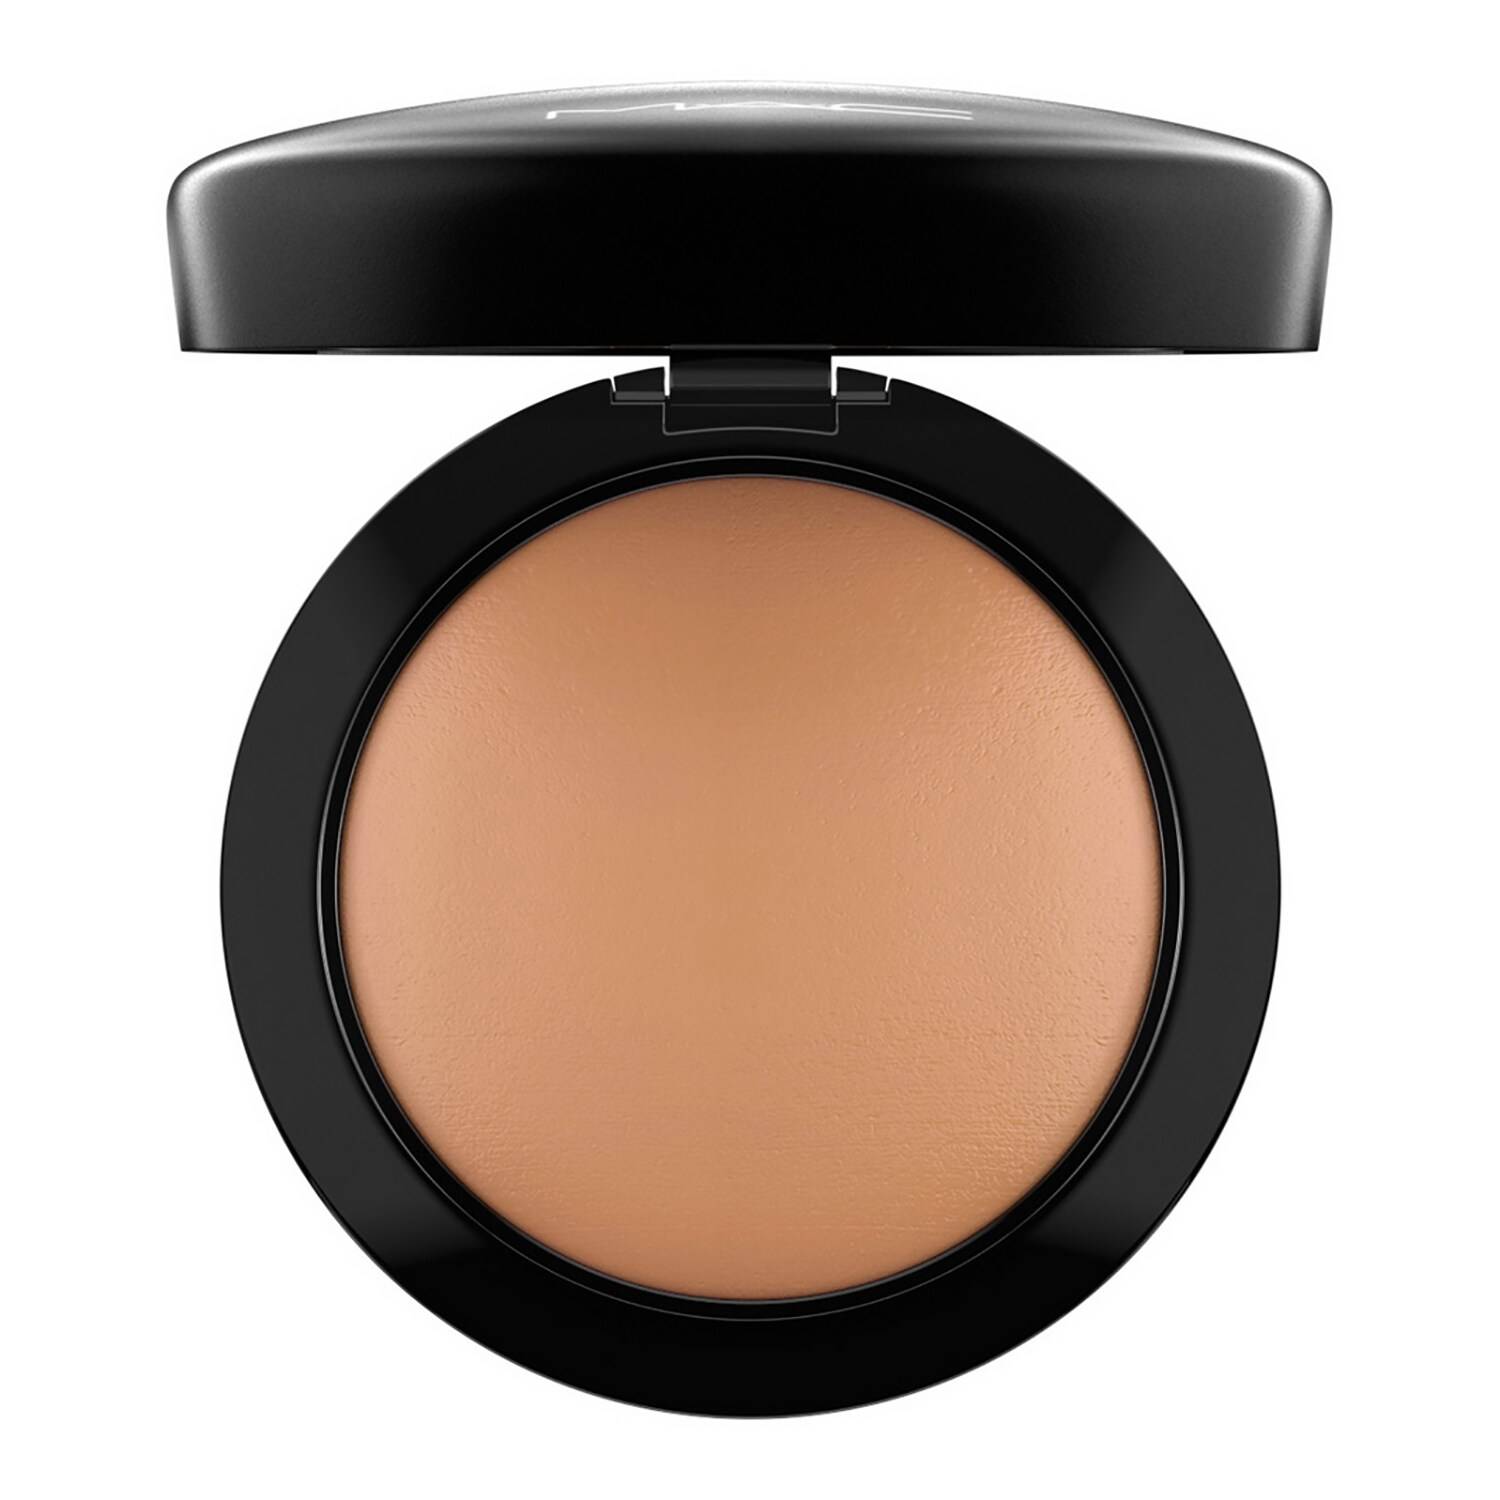 M.A.C Mineralize Skinfinish Natural 10G Give Me Sun!